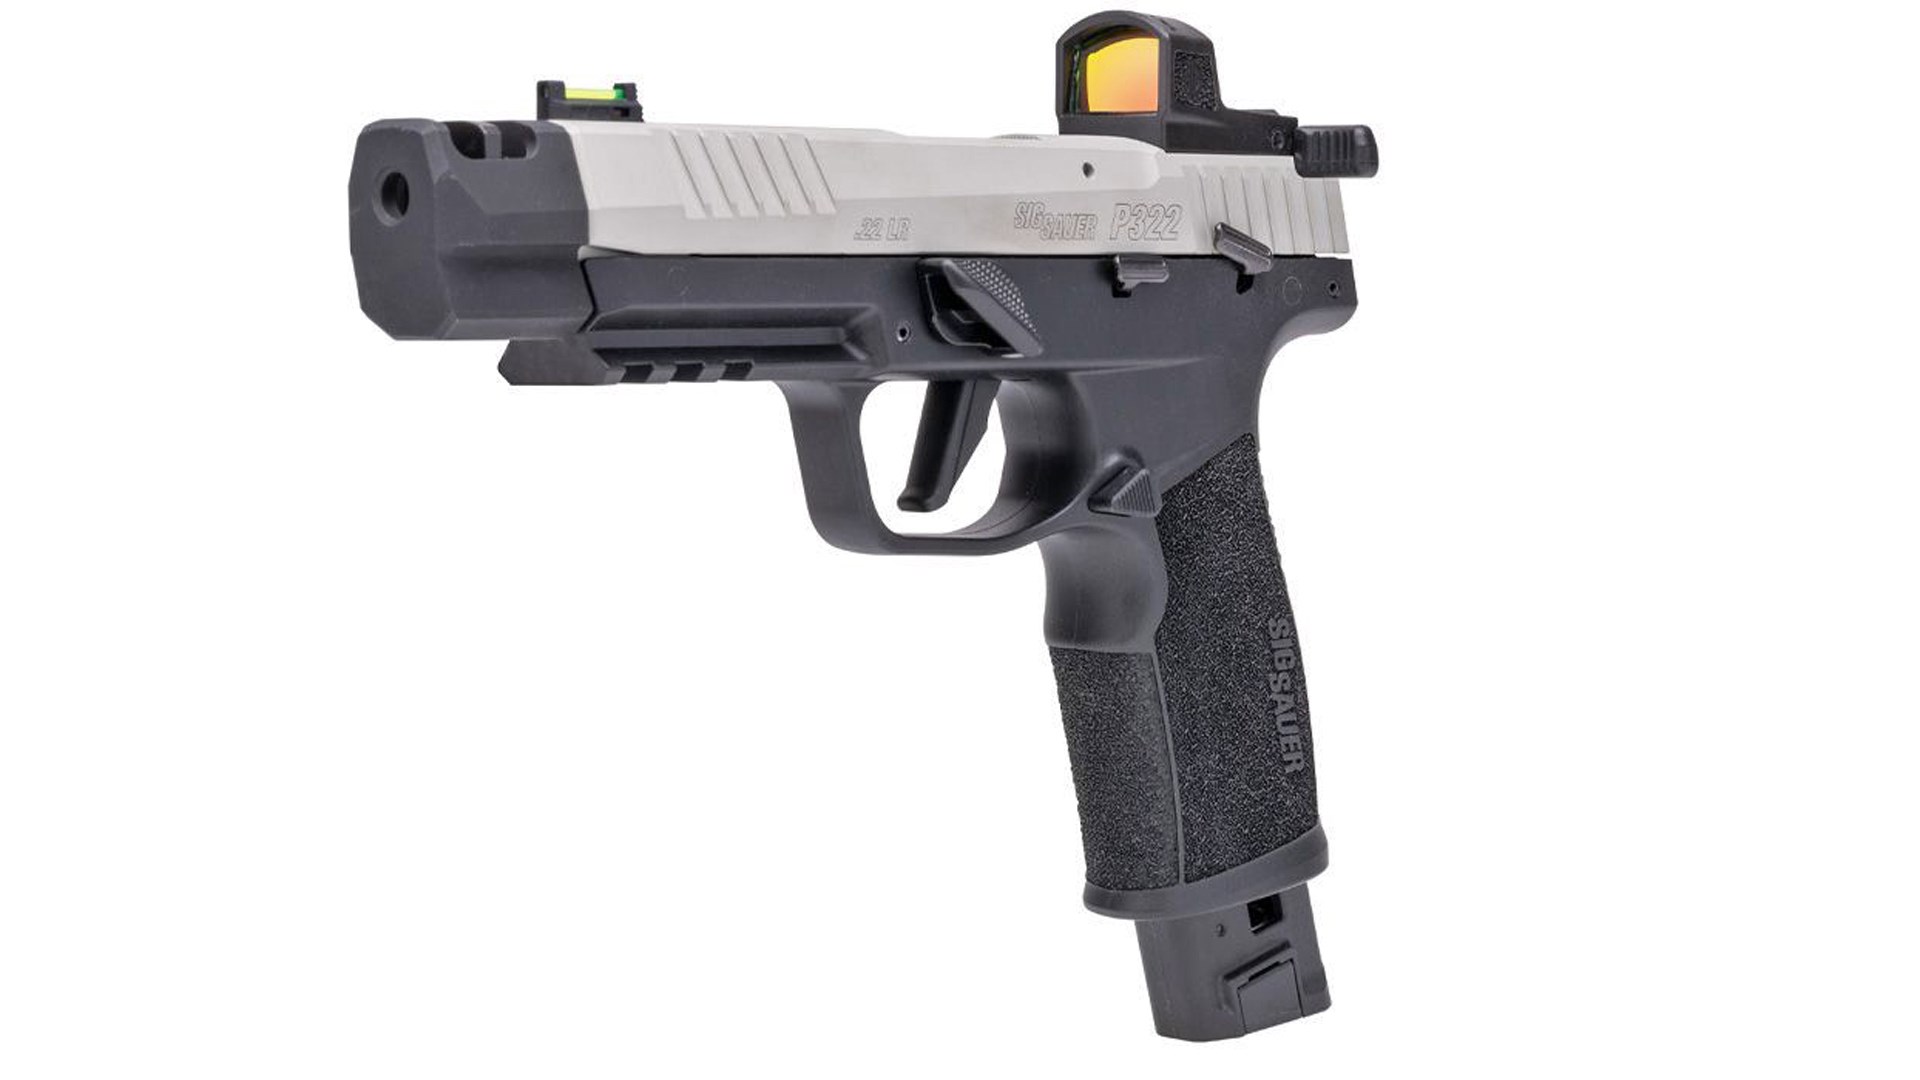 Angled shot of the front of the SIG Sauer P322-COMP pistol.